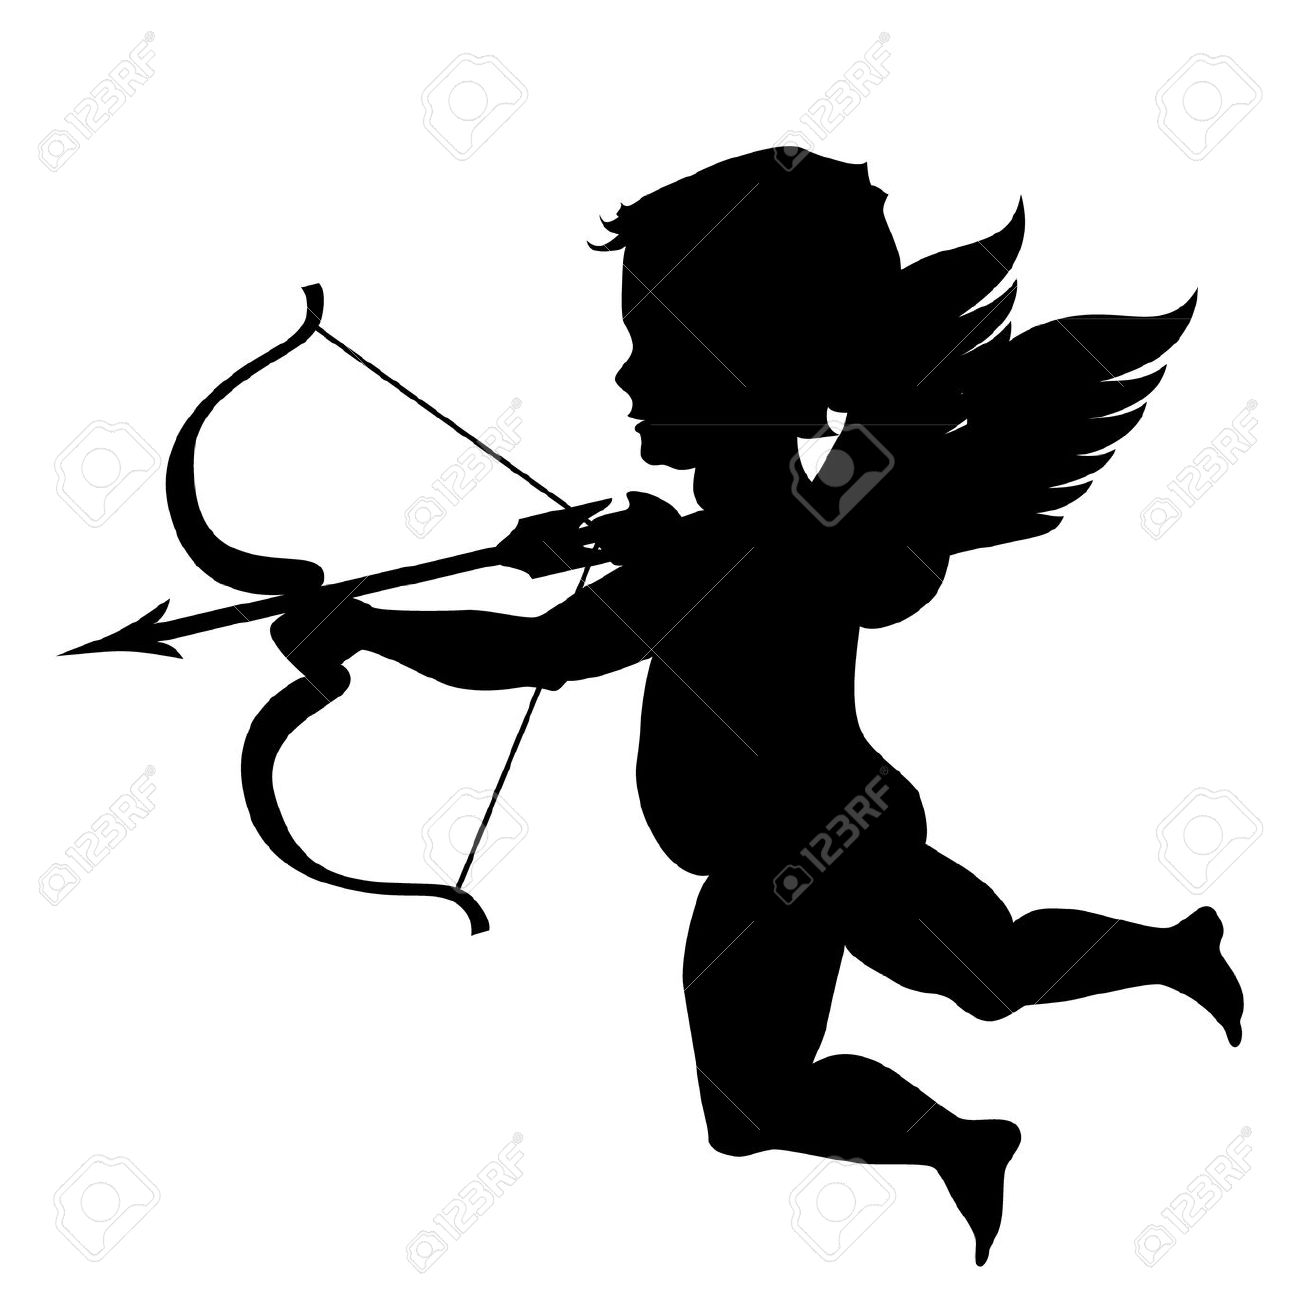 cupid: vector cupid black silhouette isolated on white